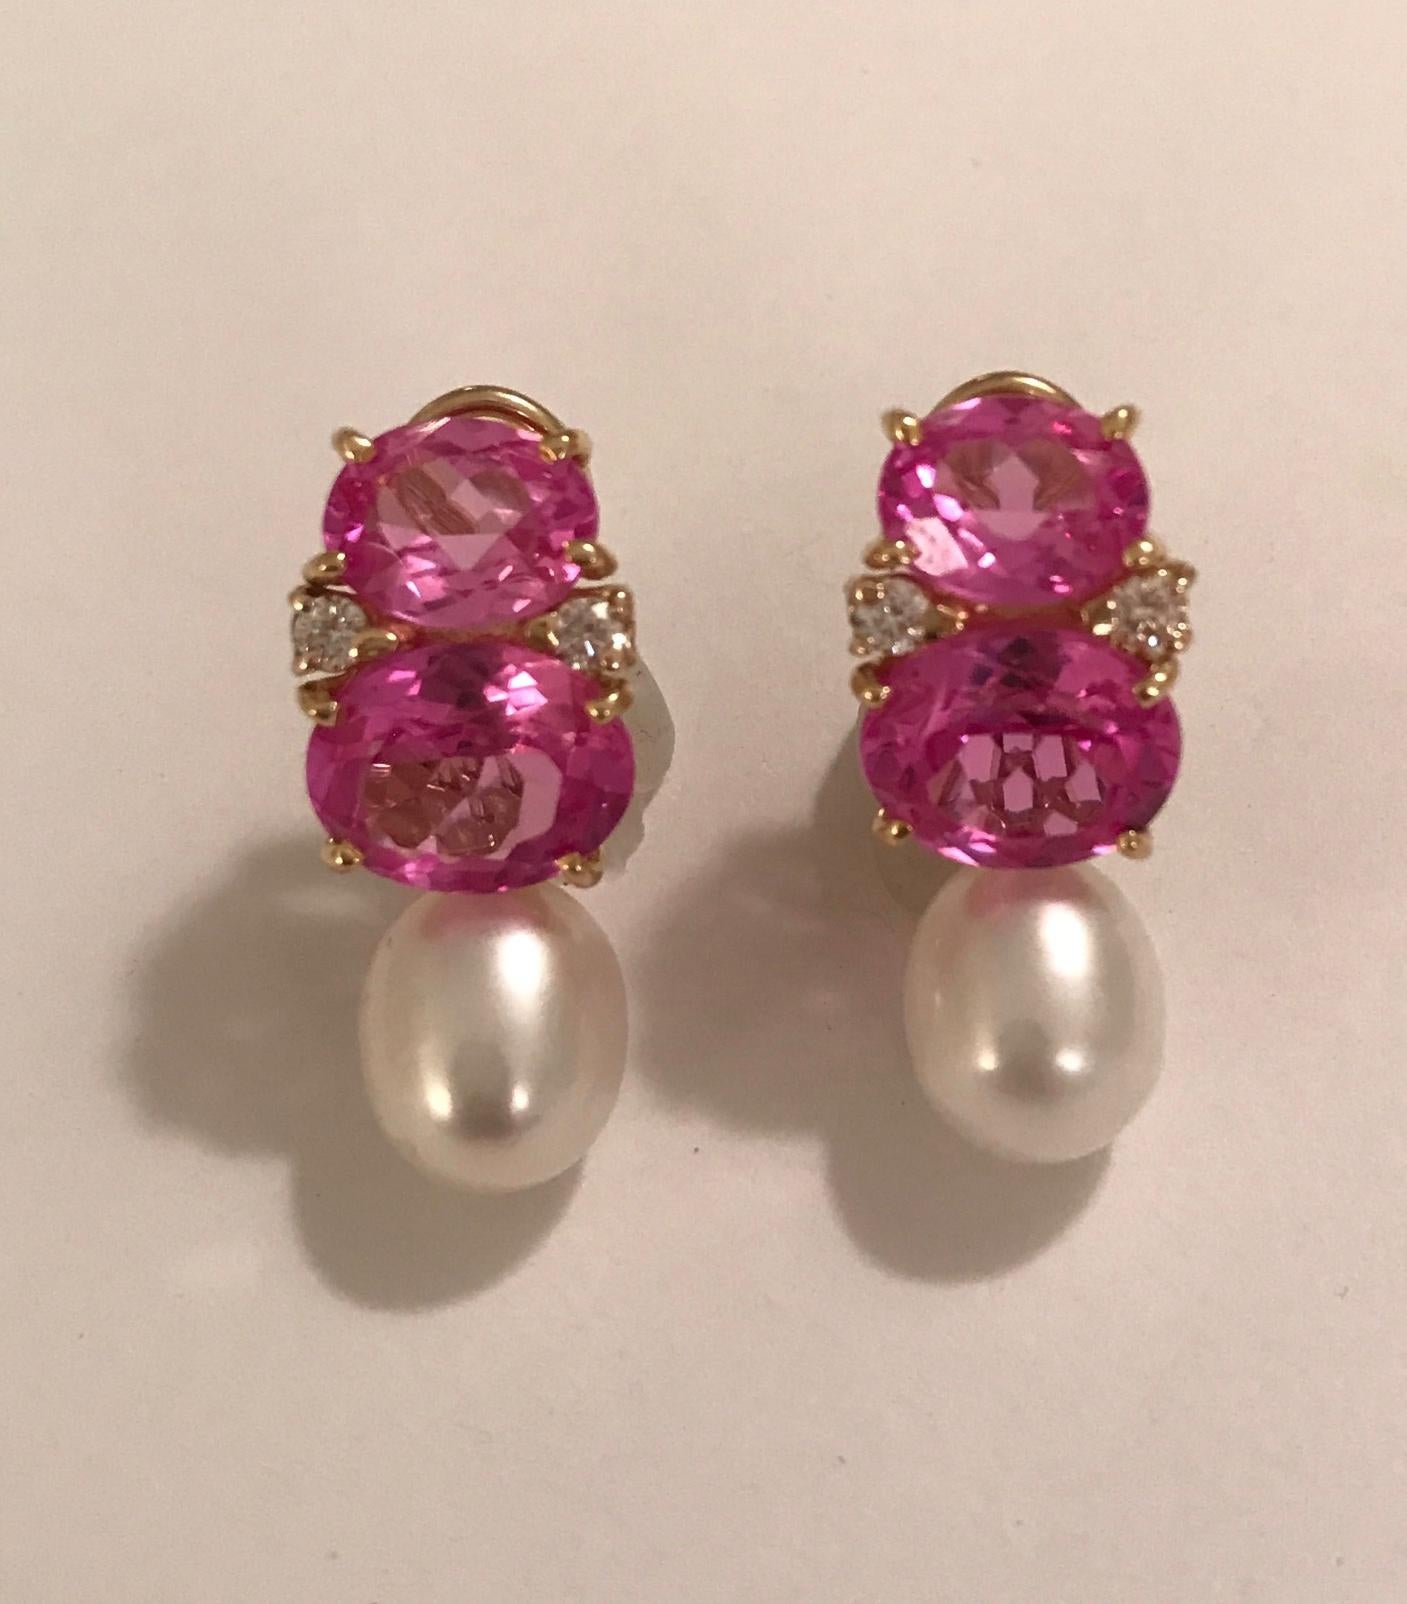 Medium Gum Drop Earrings with Pink Topaz and Diamond with Detachable Pearls For Sale 1